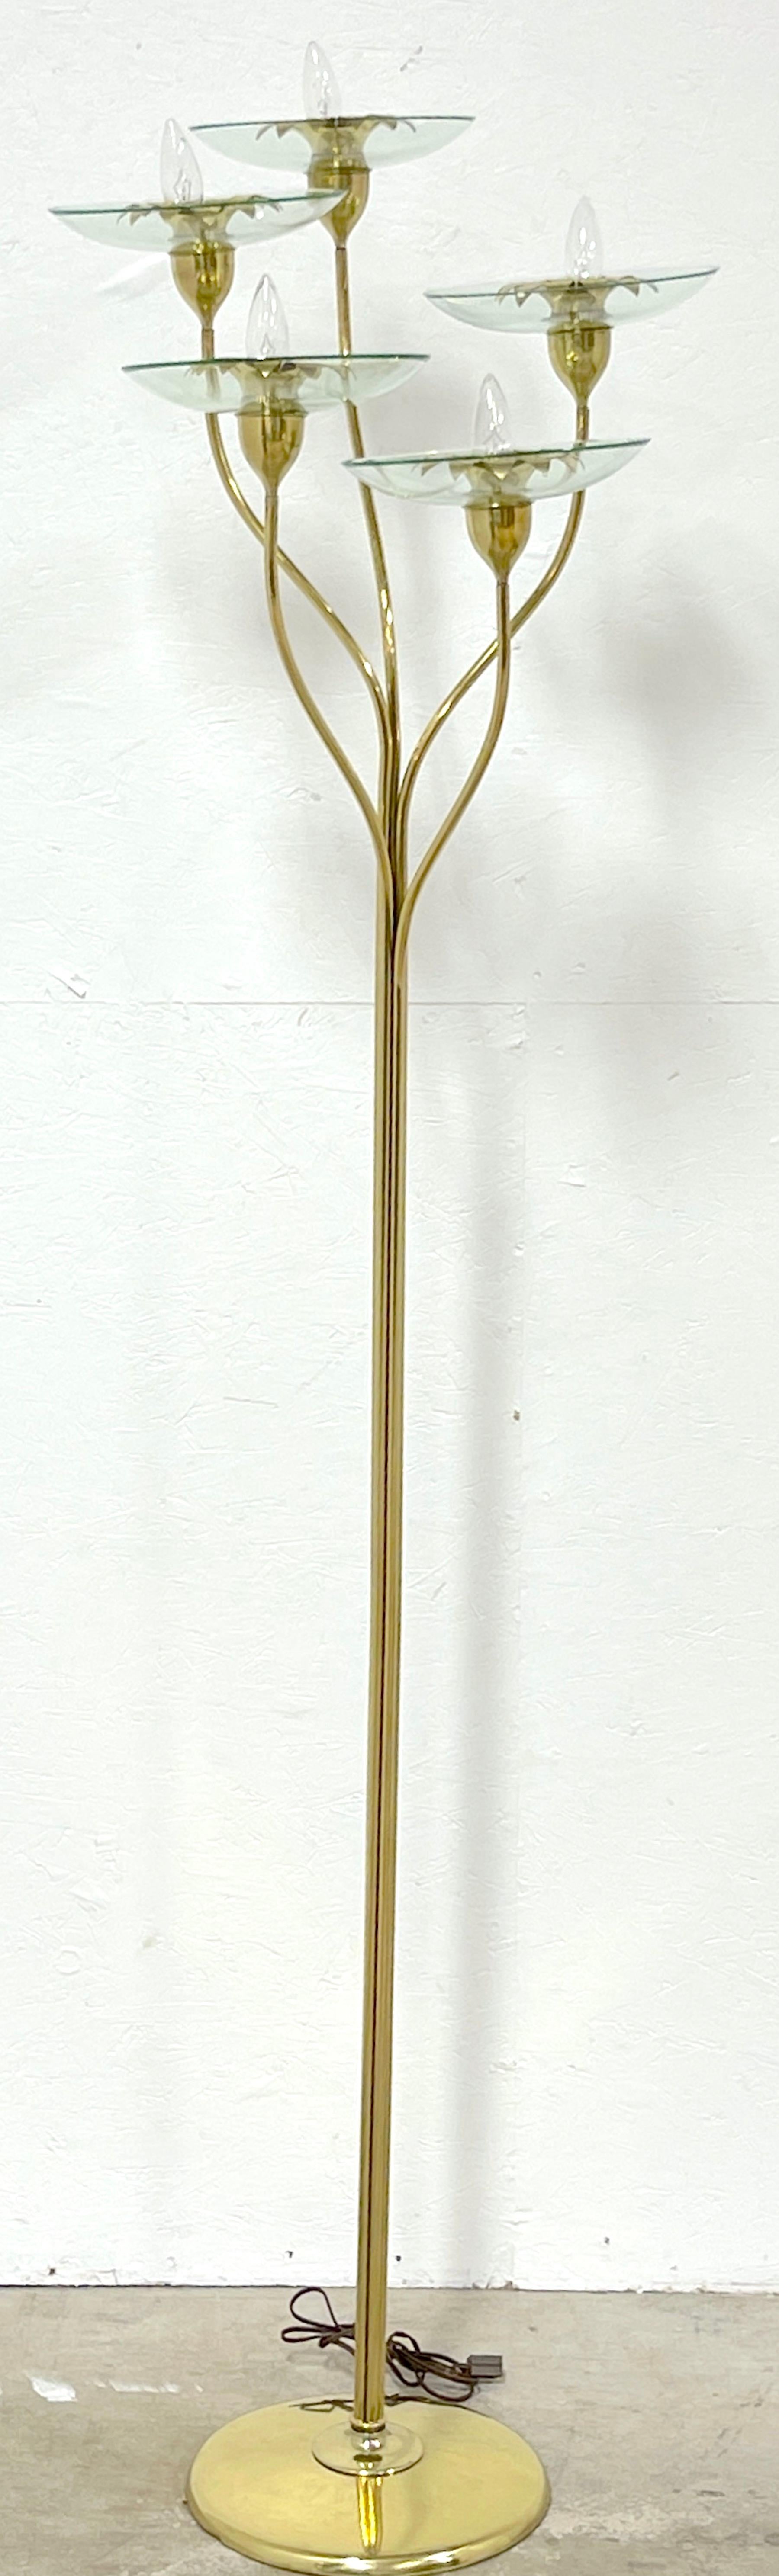 Pietro Chiesa for Fontana Arte Brass & Murano glass Torchiere
Italy, 20th century 
A rare model, of seamless organic tiered design, fitted with five stylized floral brass and 9-inch diameter Murano glass bobeches, fitted with a candelabra bulb,